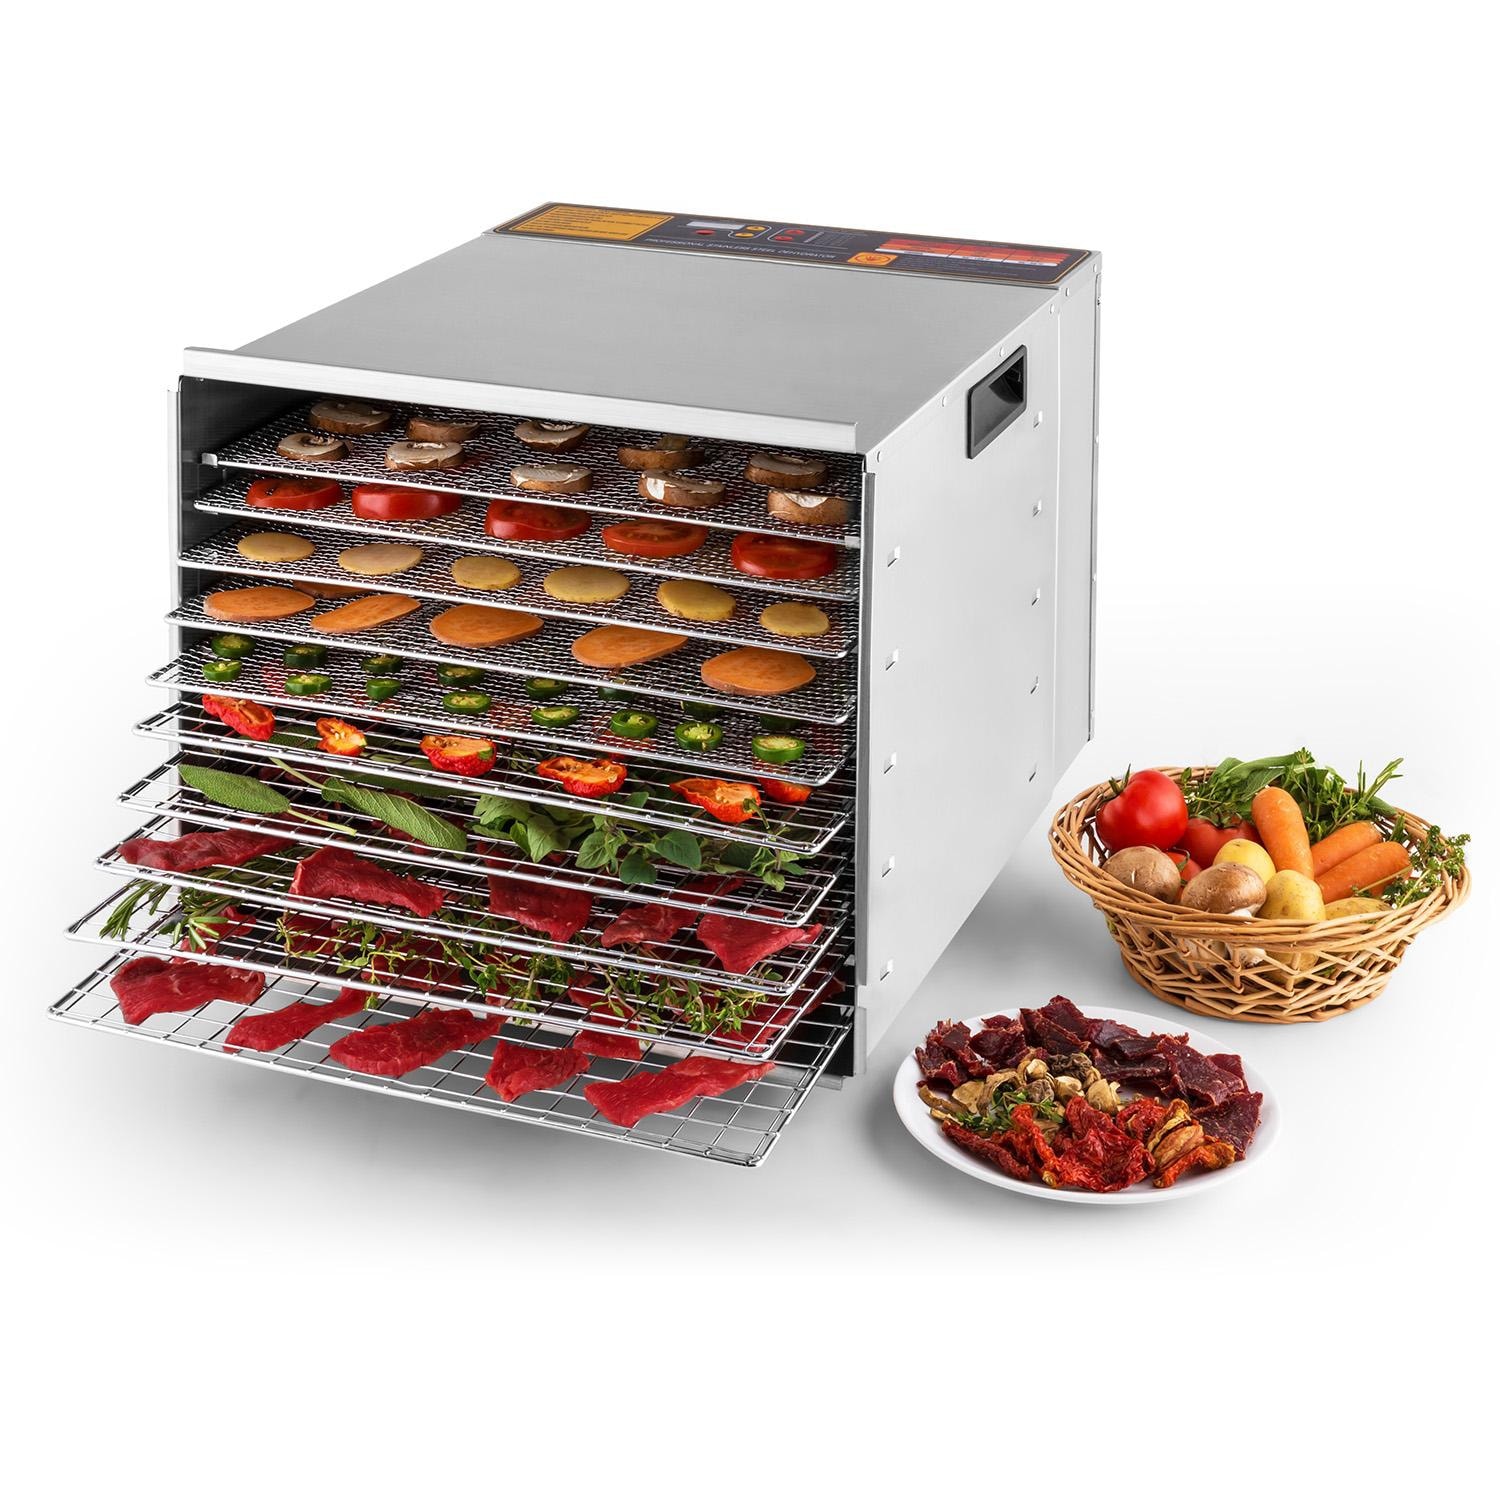 https://ak1.ostkcdn.com/images/products/is/images/direct/ec8205d2ca3ec1abec3039b2f59a48f6bc125e47/Della-Commercial-1200W-10-Tray-Food-Dehydrator-Nut-Durable-Fruit-Sausage-Jerky-Dryer%2C-Stainless-Steel.jpg